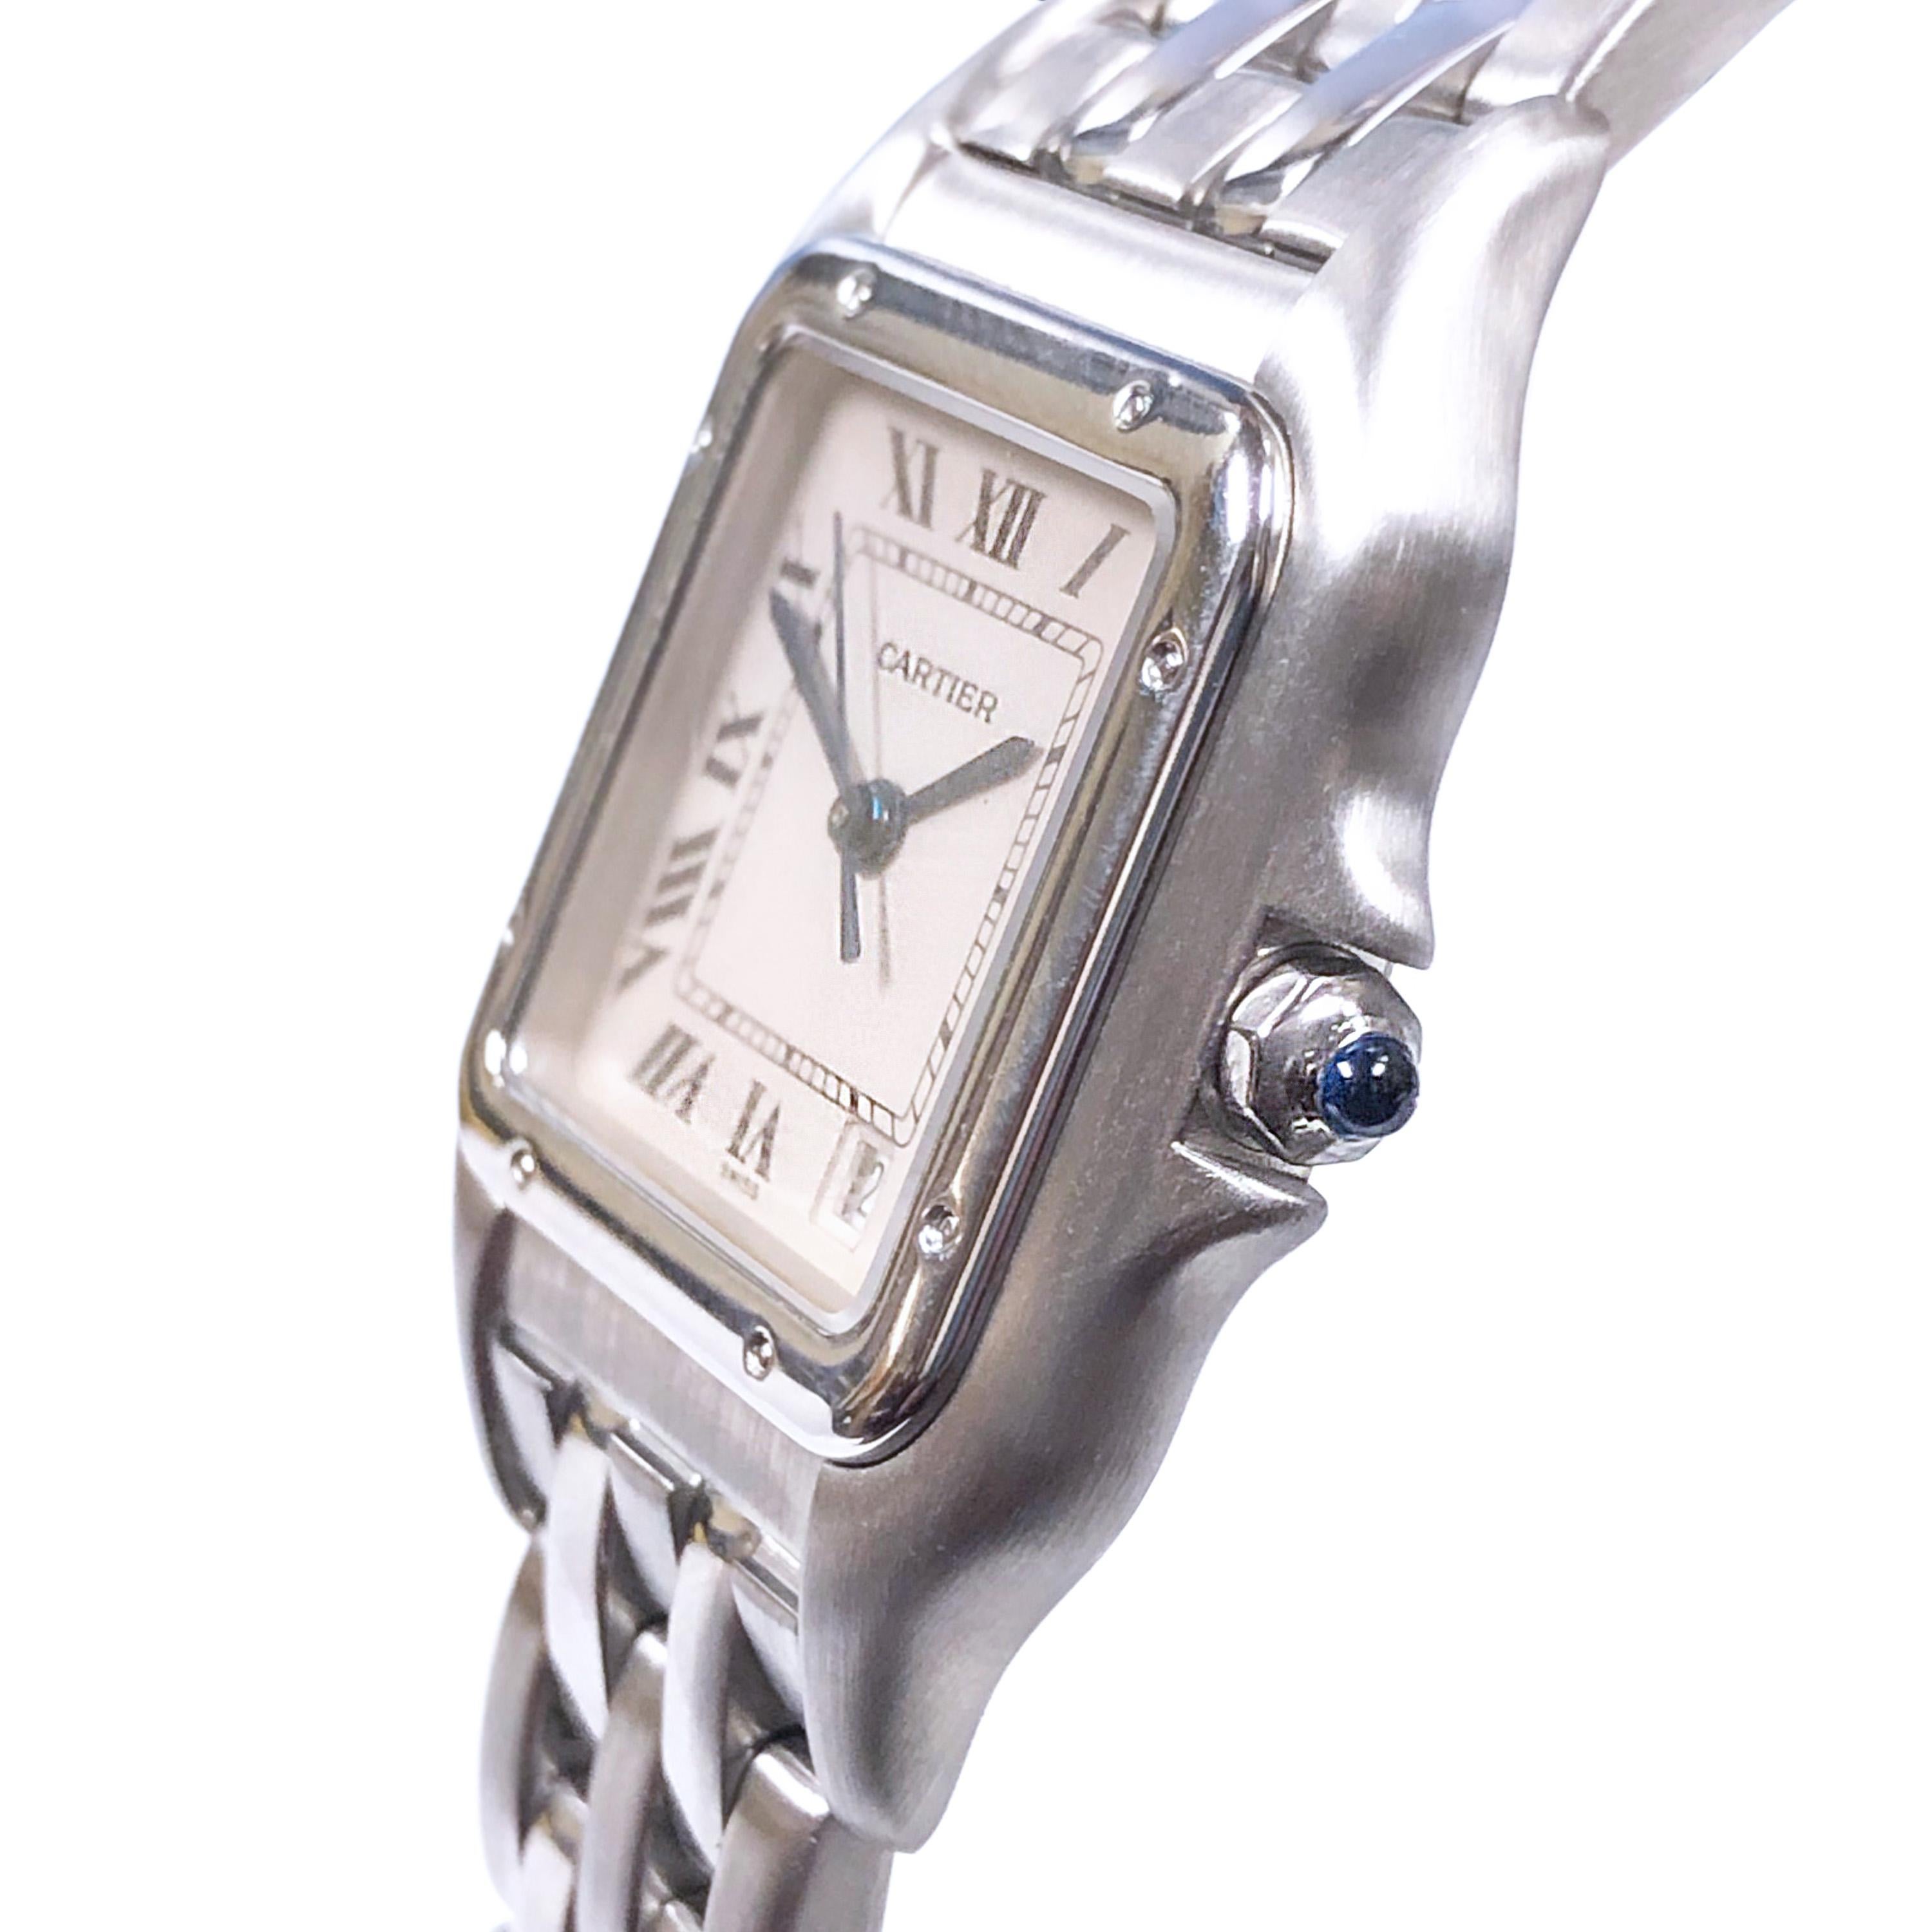 Circa 2000 Cartier Classic Panther Wrist watch, 36 X 27 MM Stainless Steel case, Quartz Movement, White Dial with Black Roman Numerals, Calendar window at the 5 position, sweep seconds hand, scratch resistant crystal and a sapphire Crown. 5/8 inch